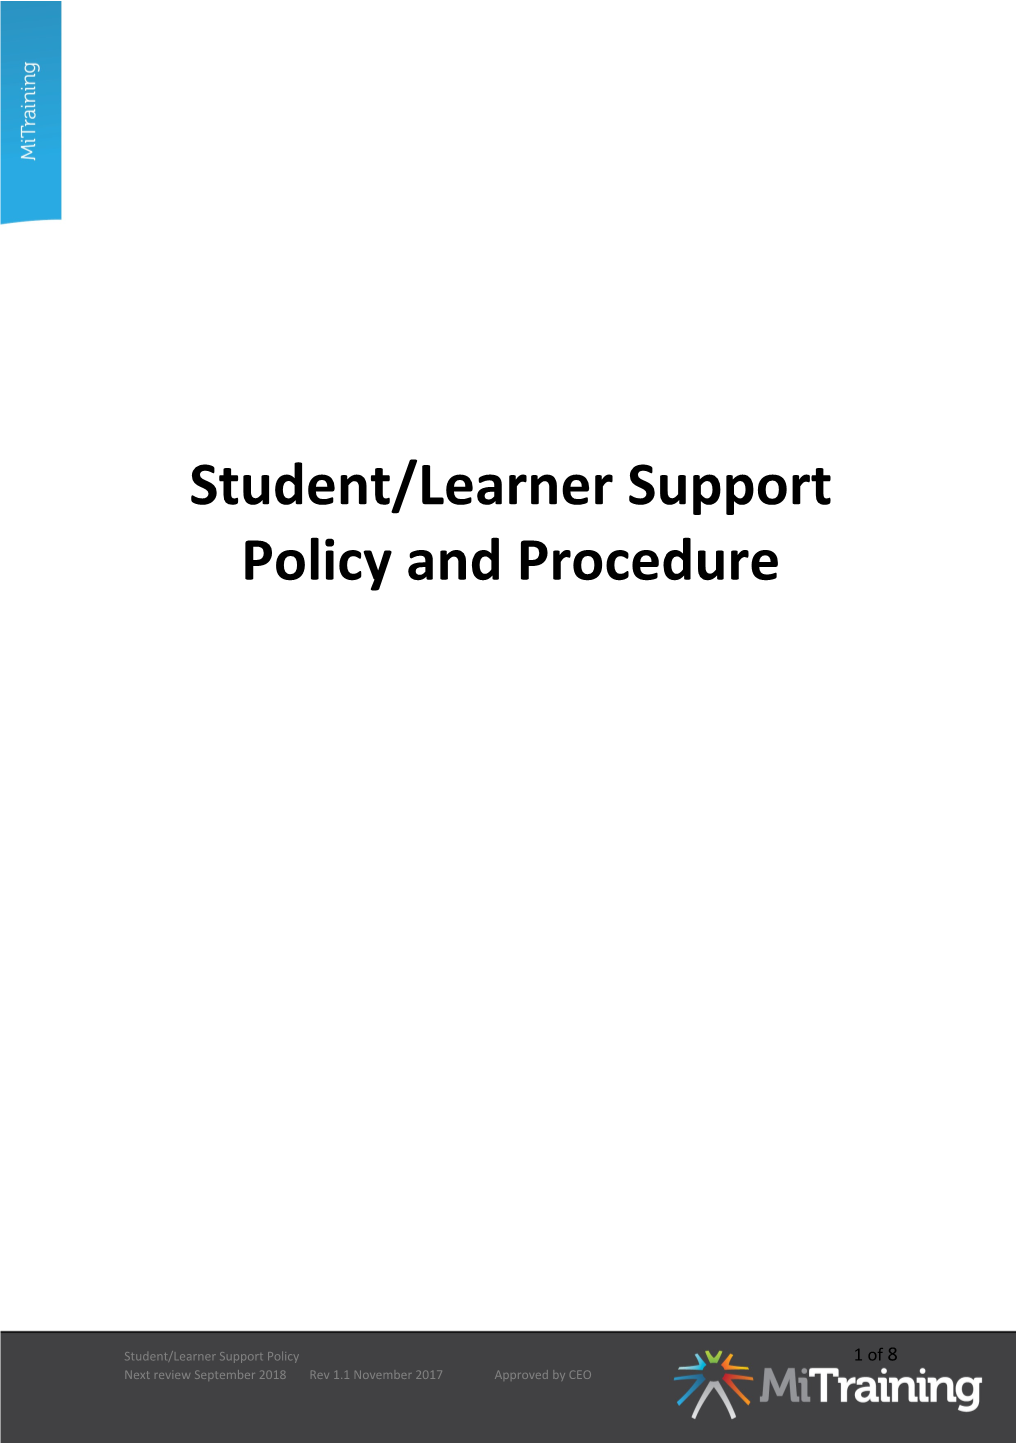 Student/Learner Support Policy and Procedure